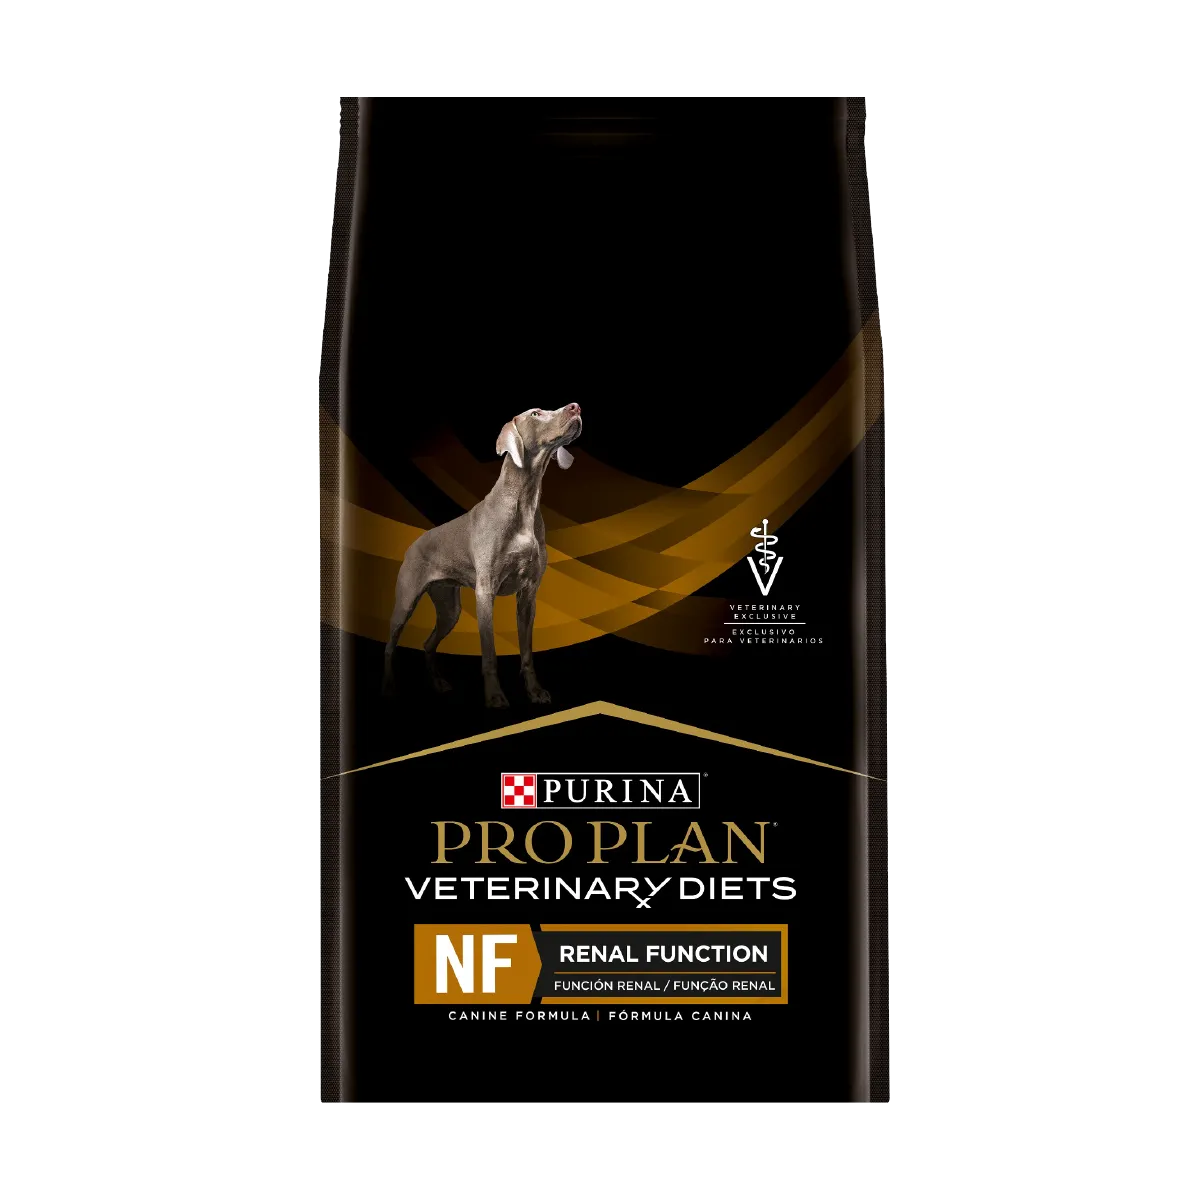 purina-pro-plan-veterinay-diets-dog-nf-renal-function